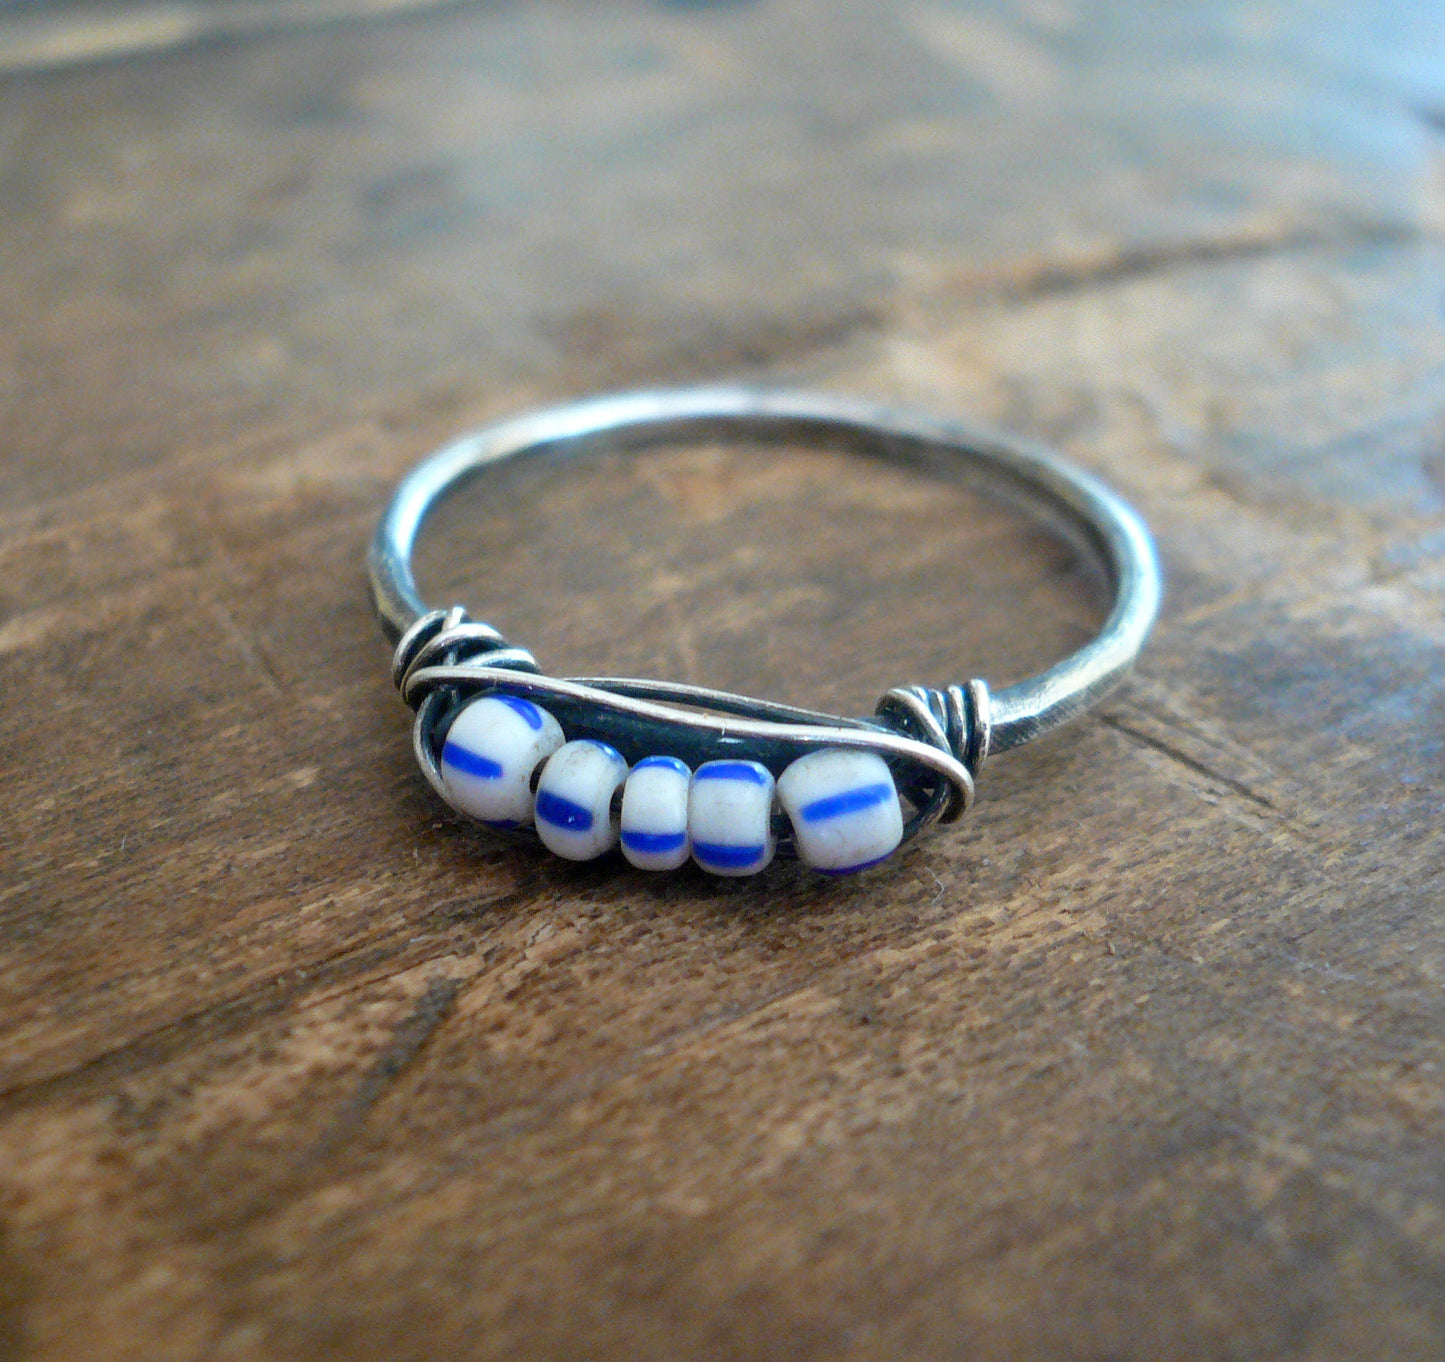 Nestle Ring in Wedgewood - Sterling Silver Stacking Ring. Wire Wrapped Antique European Seed Beads.Hand forged. Handmade by jNicDesigns